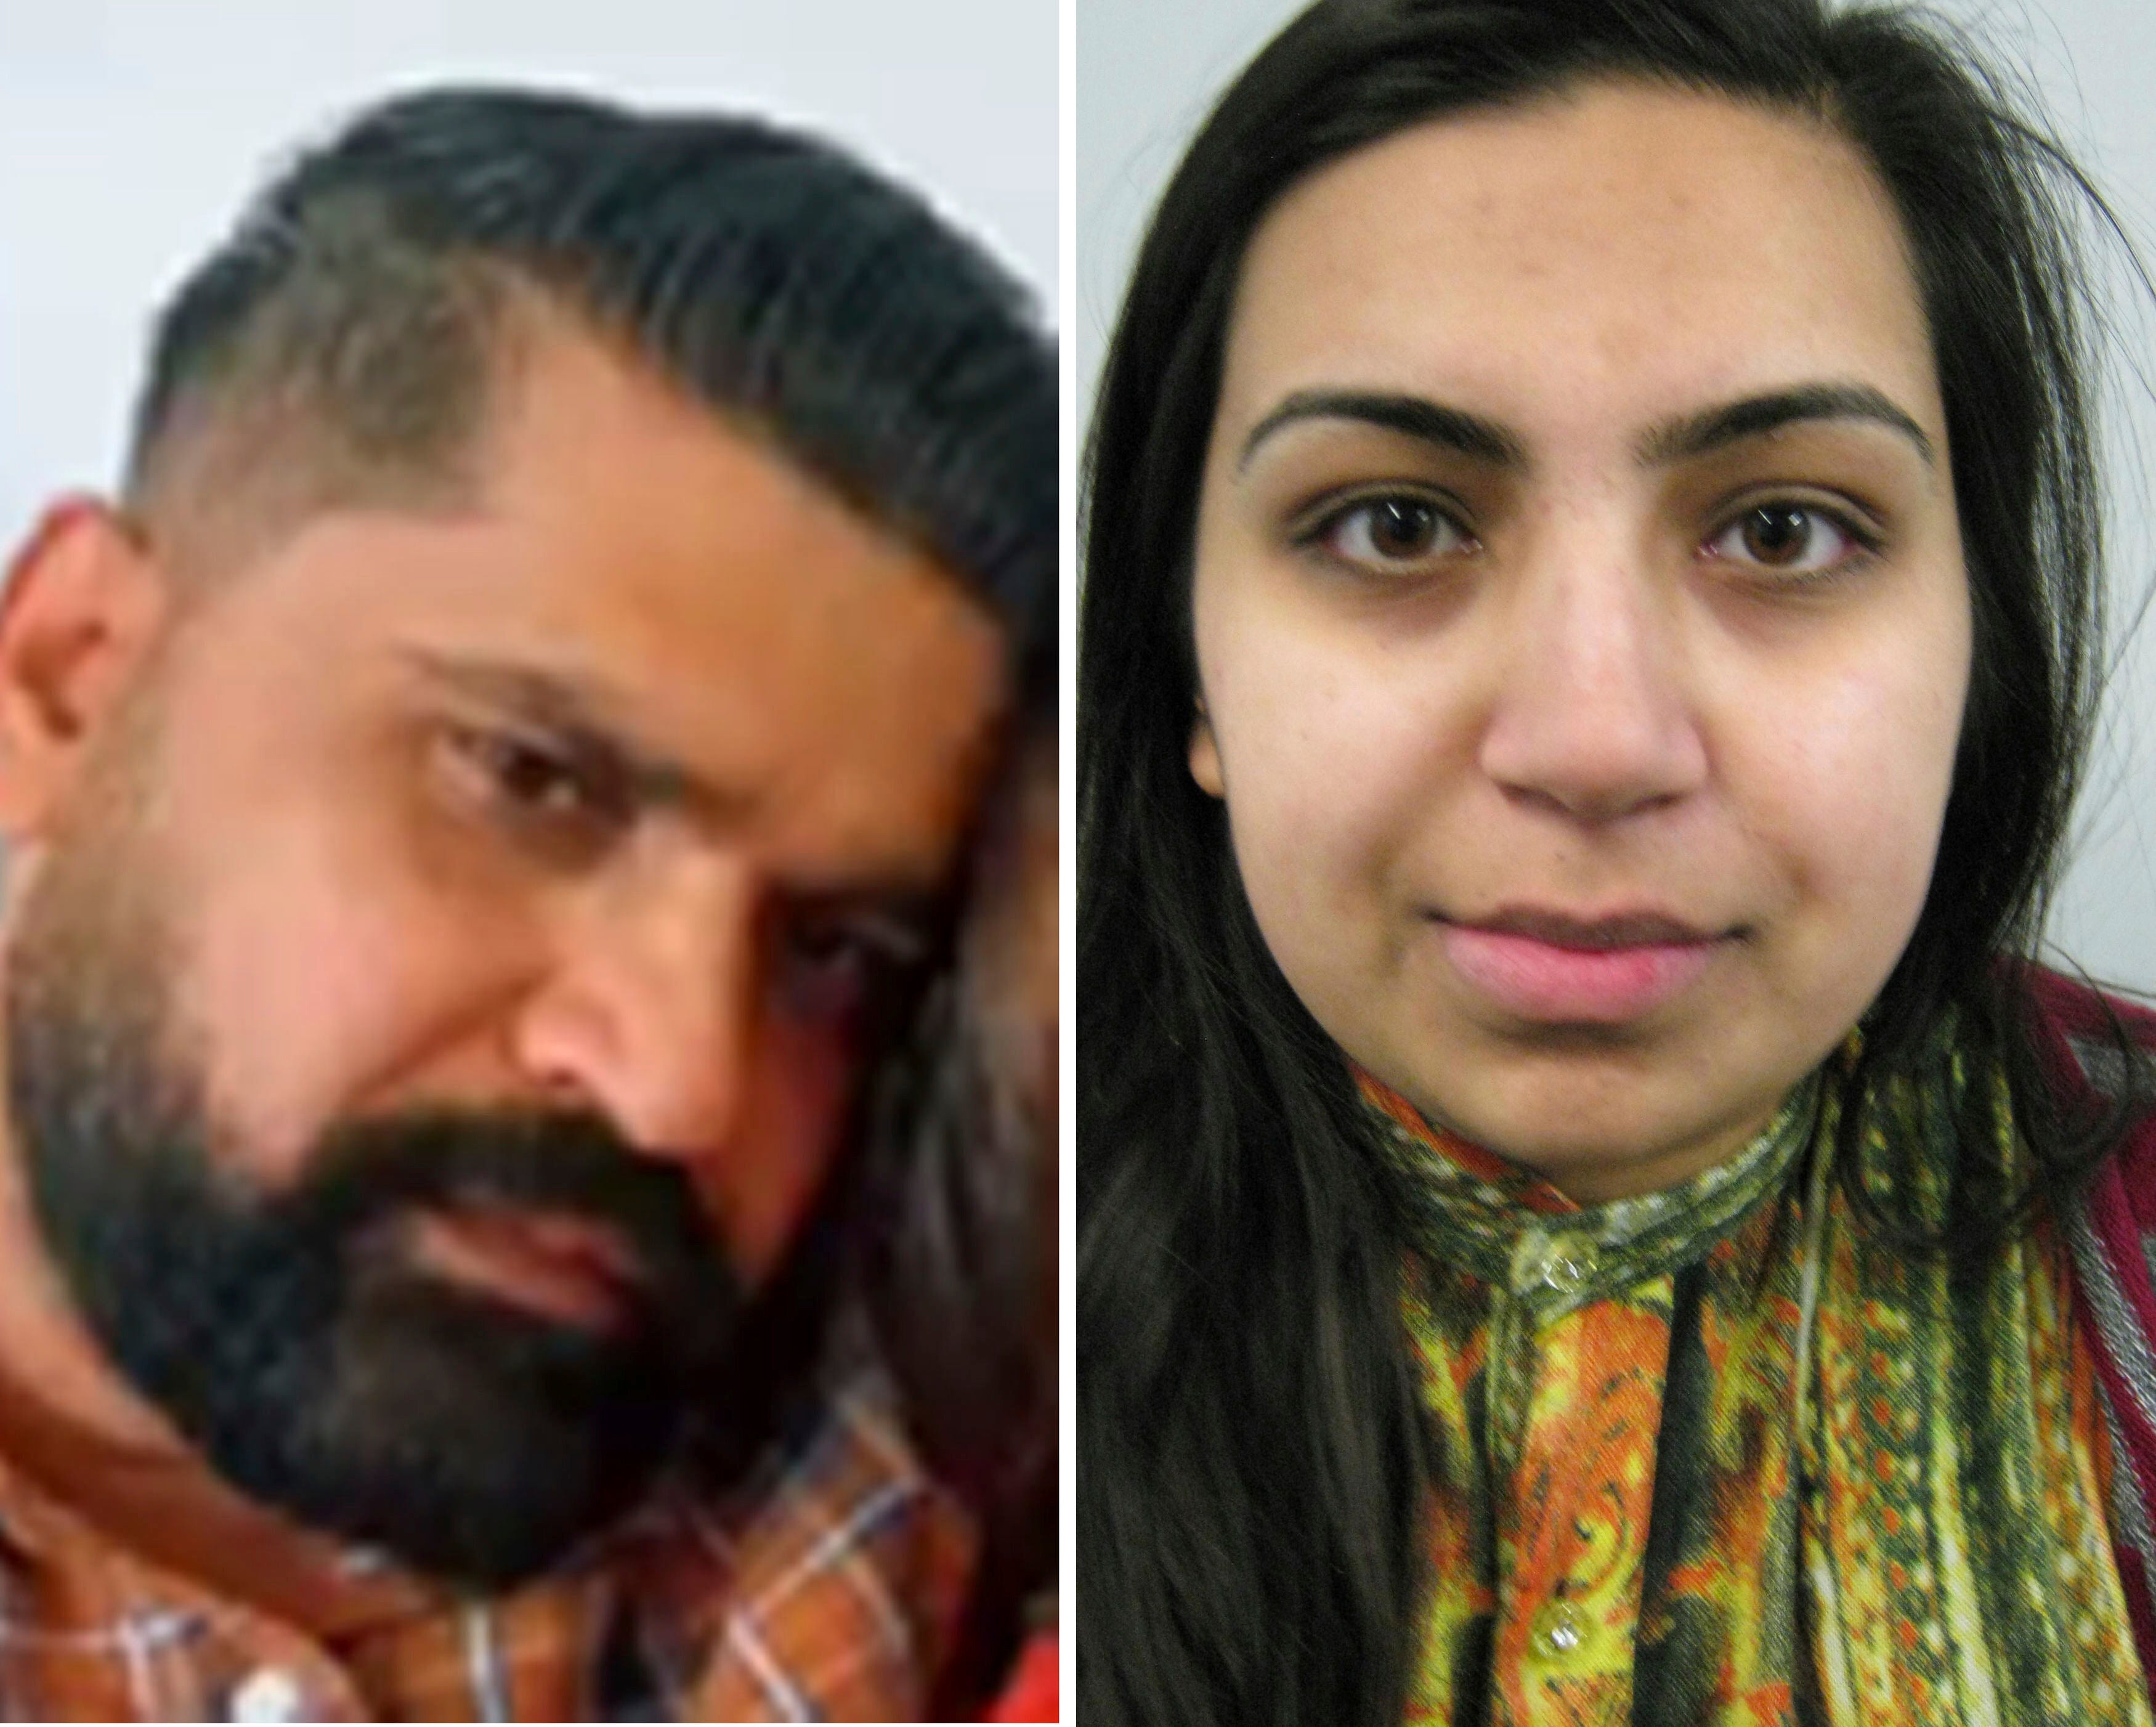 Urfan Sharif and his partner Beinash Batool are wanted for questioning